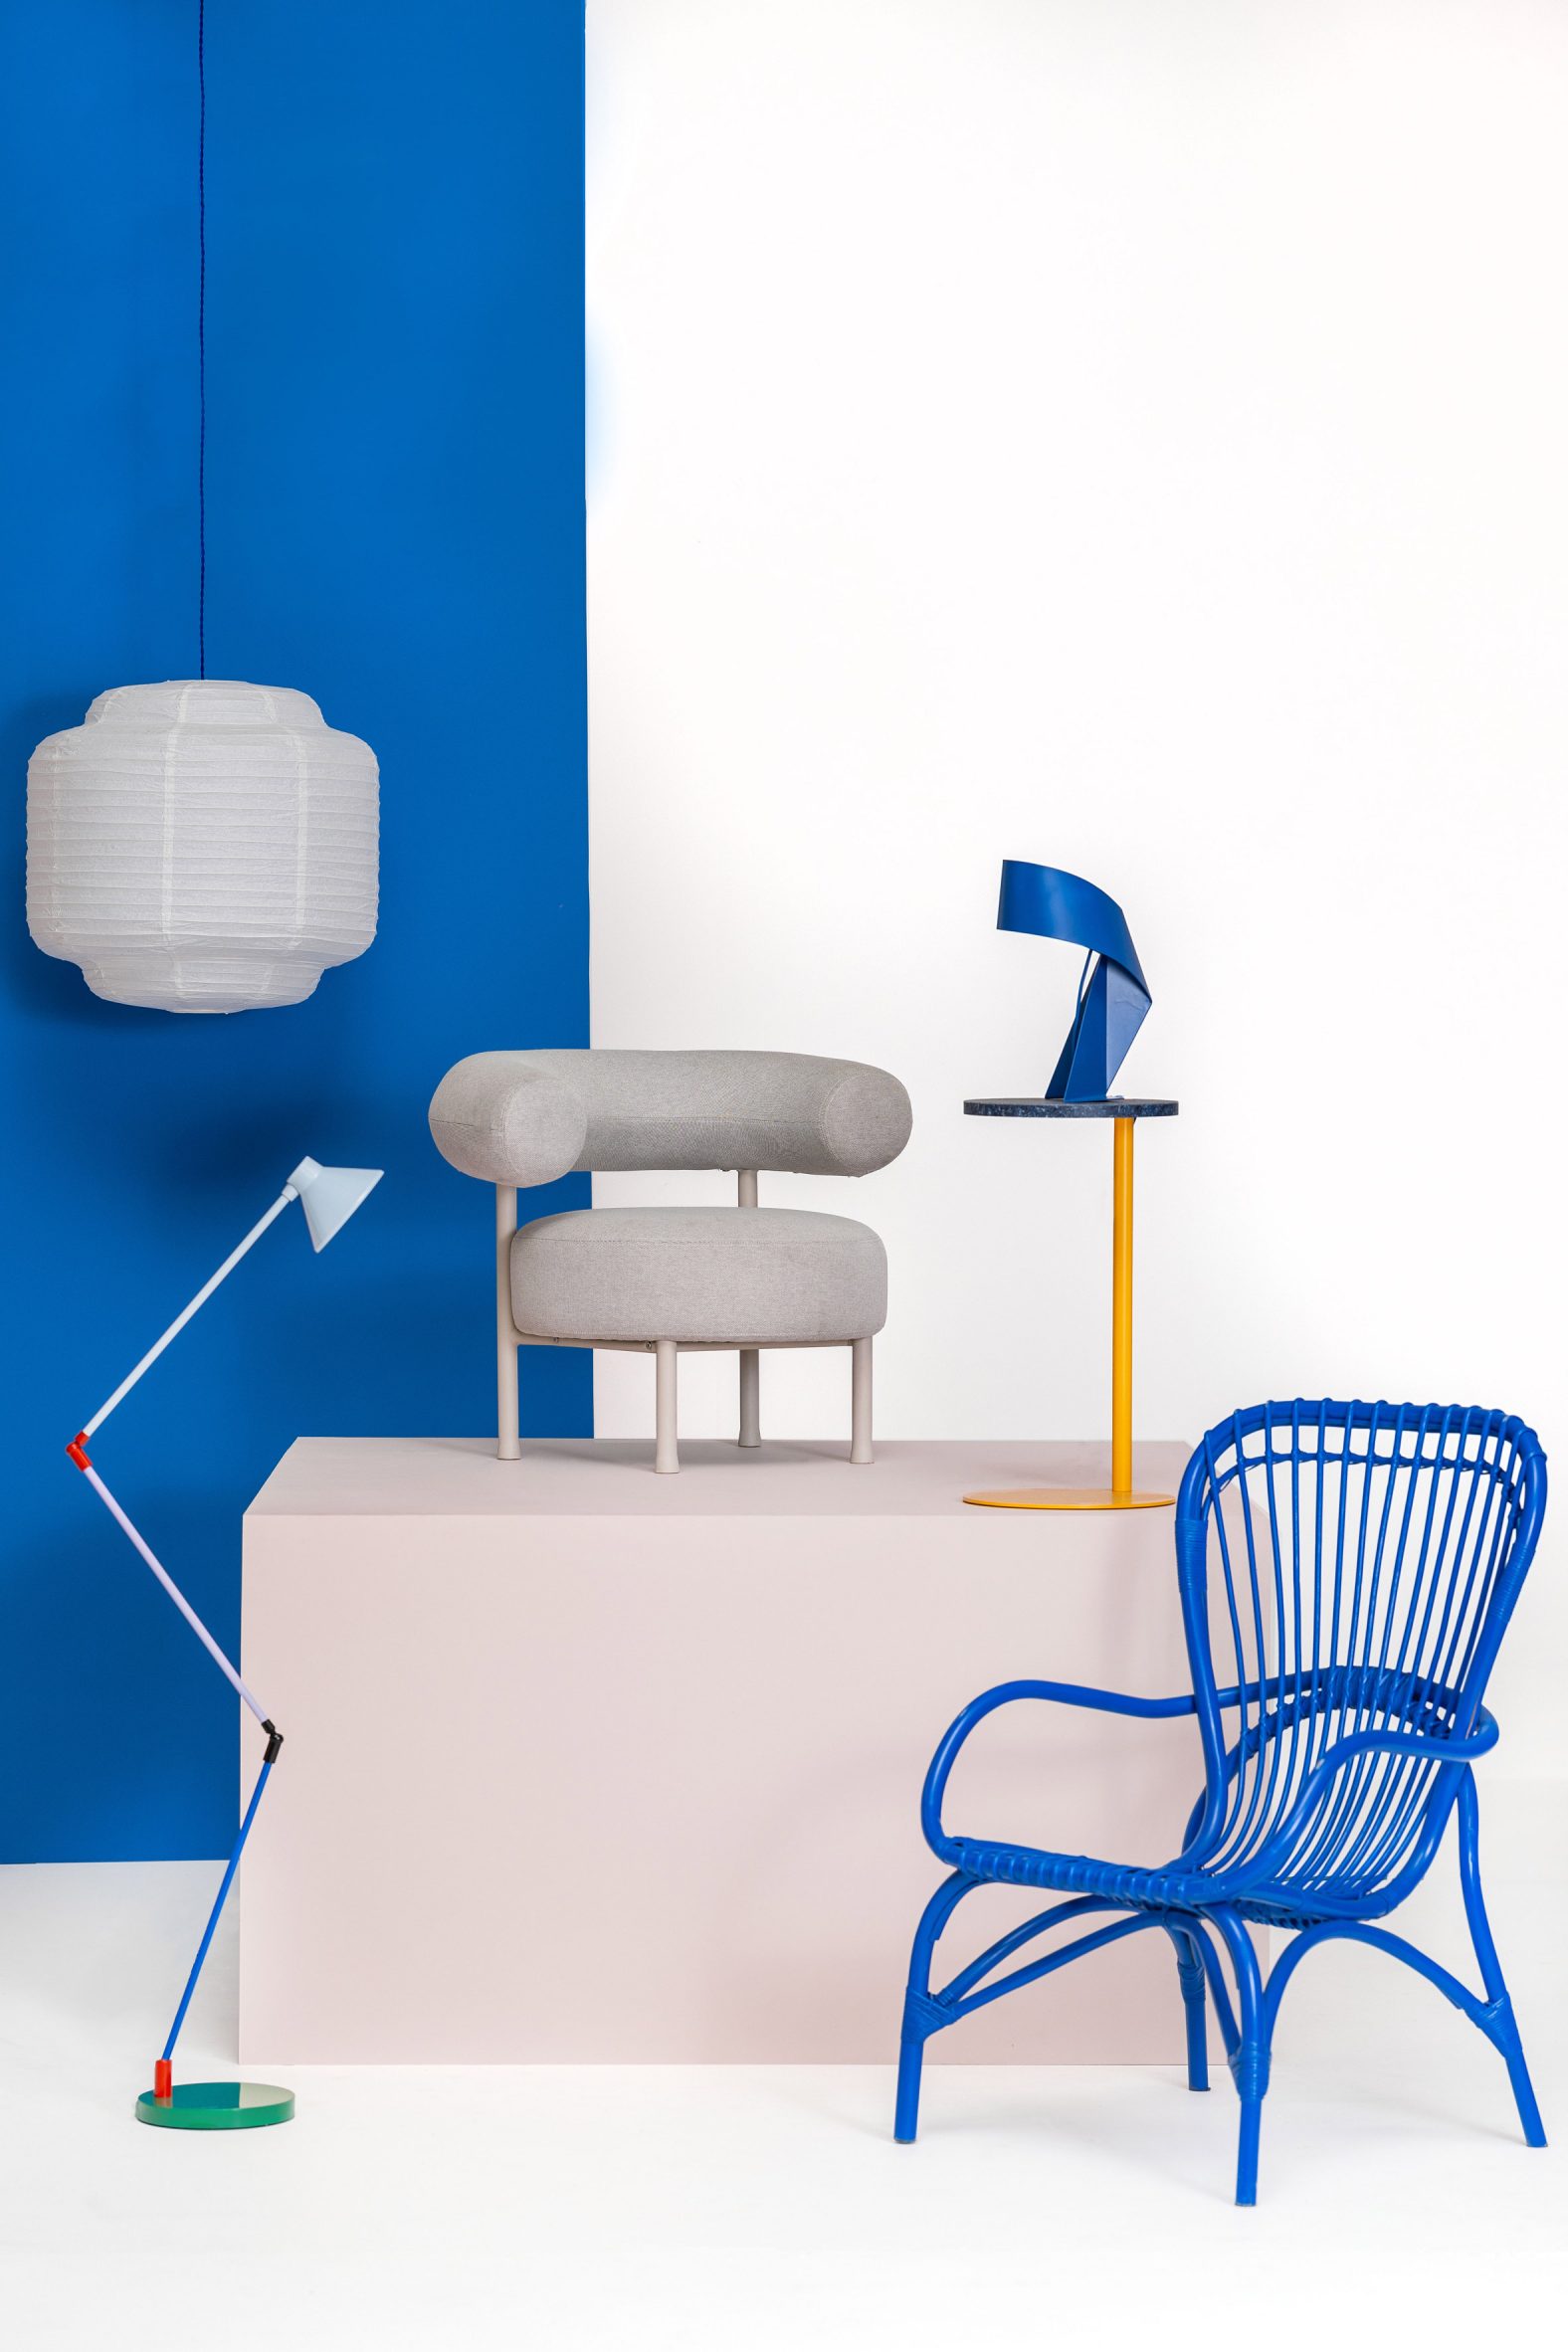 Studio photo of chairs and lamps from the Habitat 60 Years of Design collection